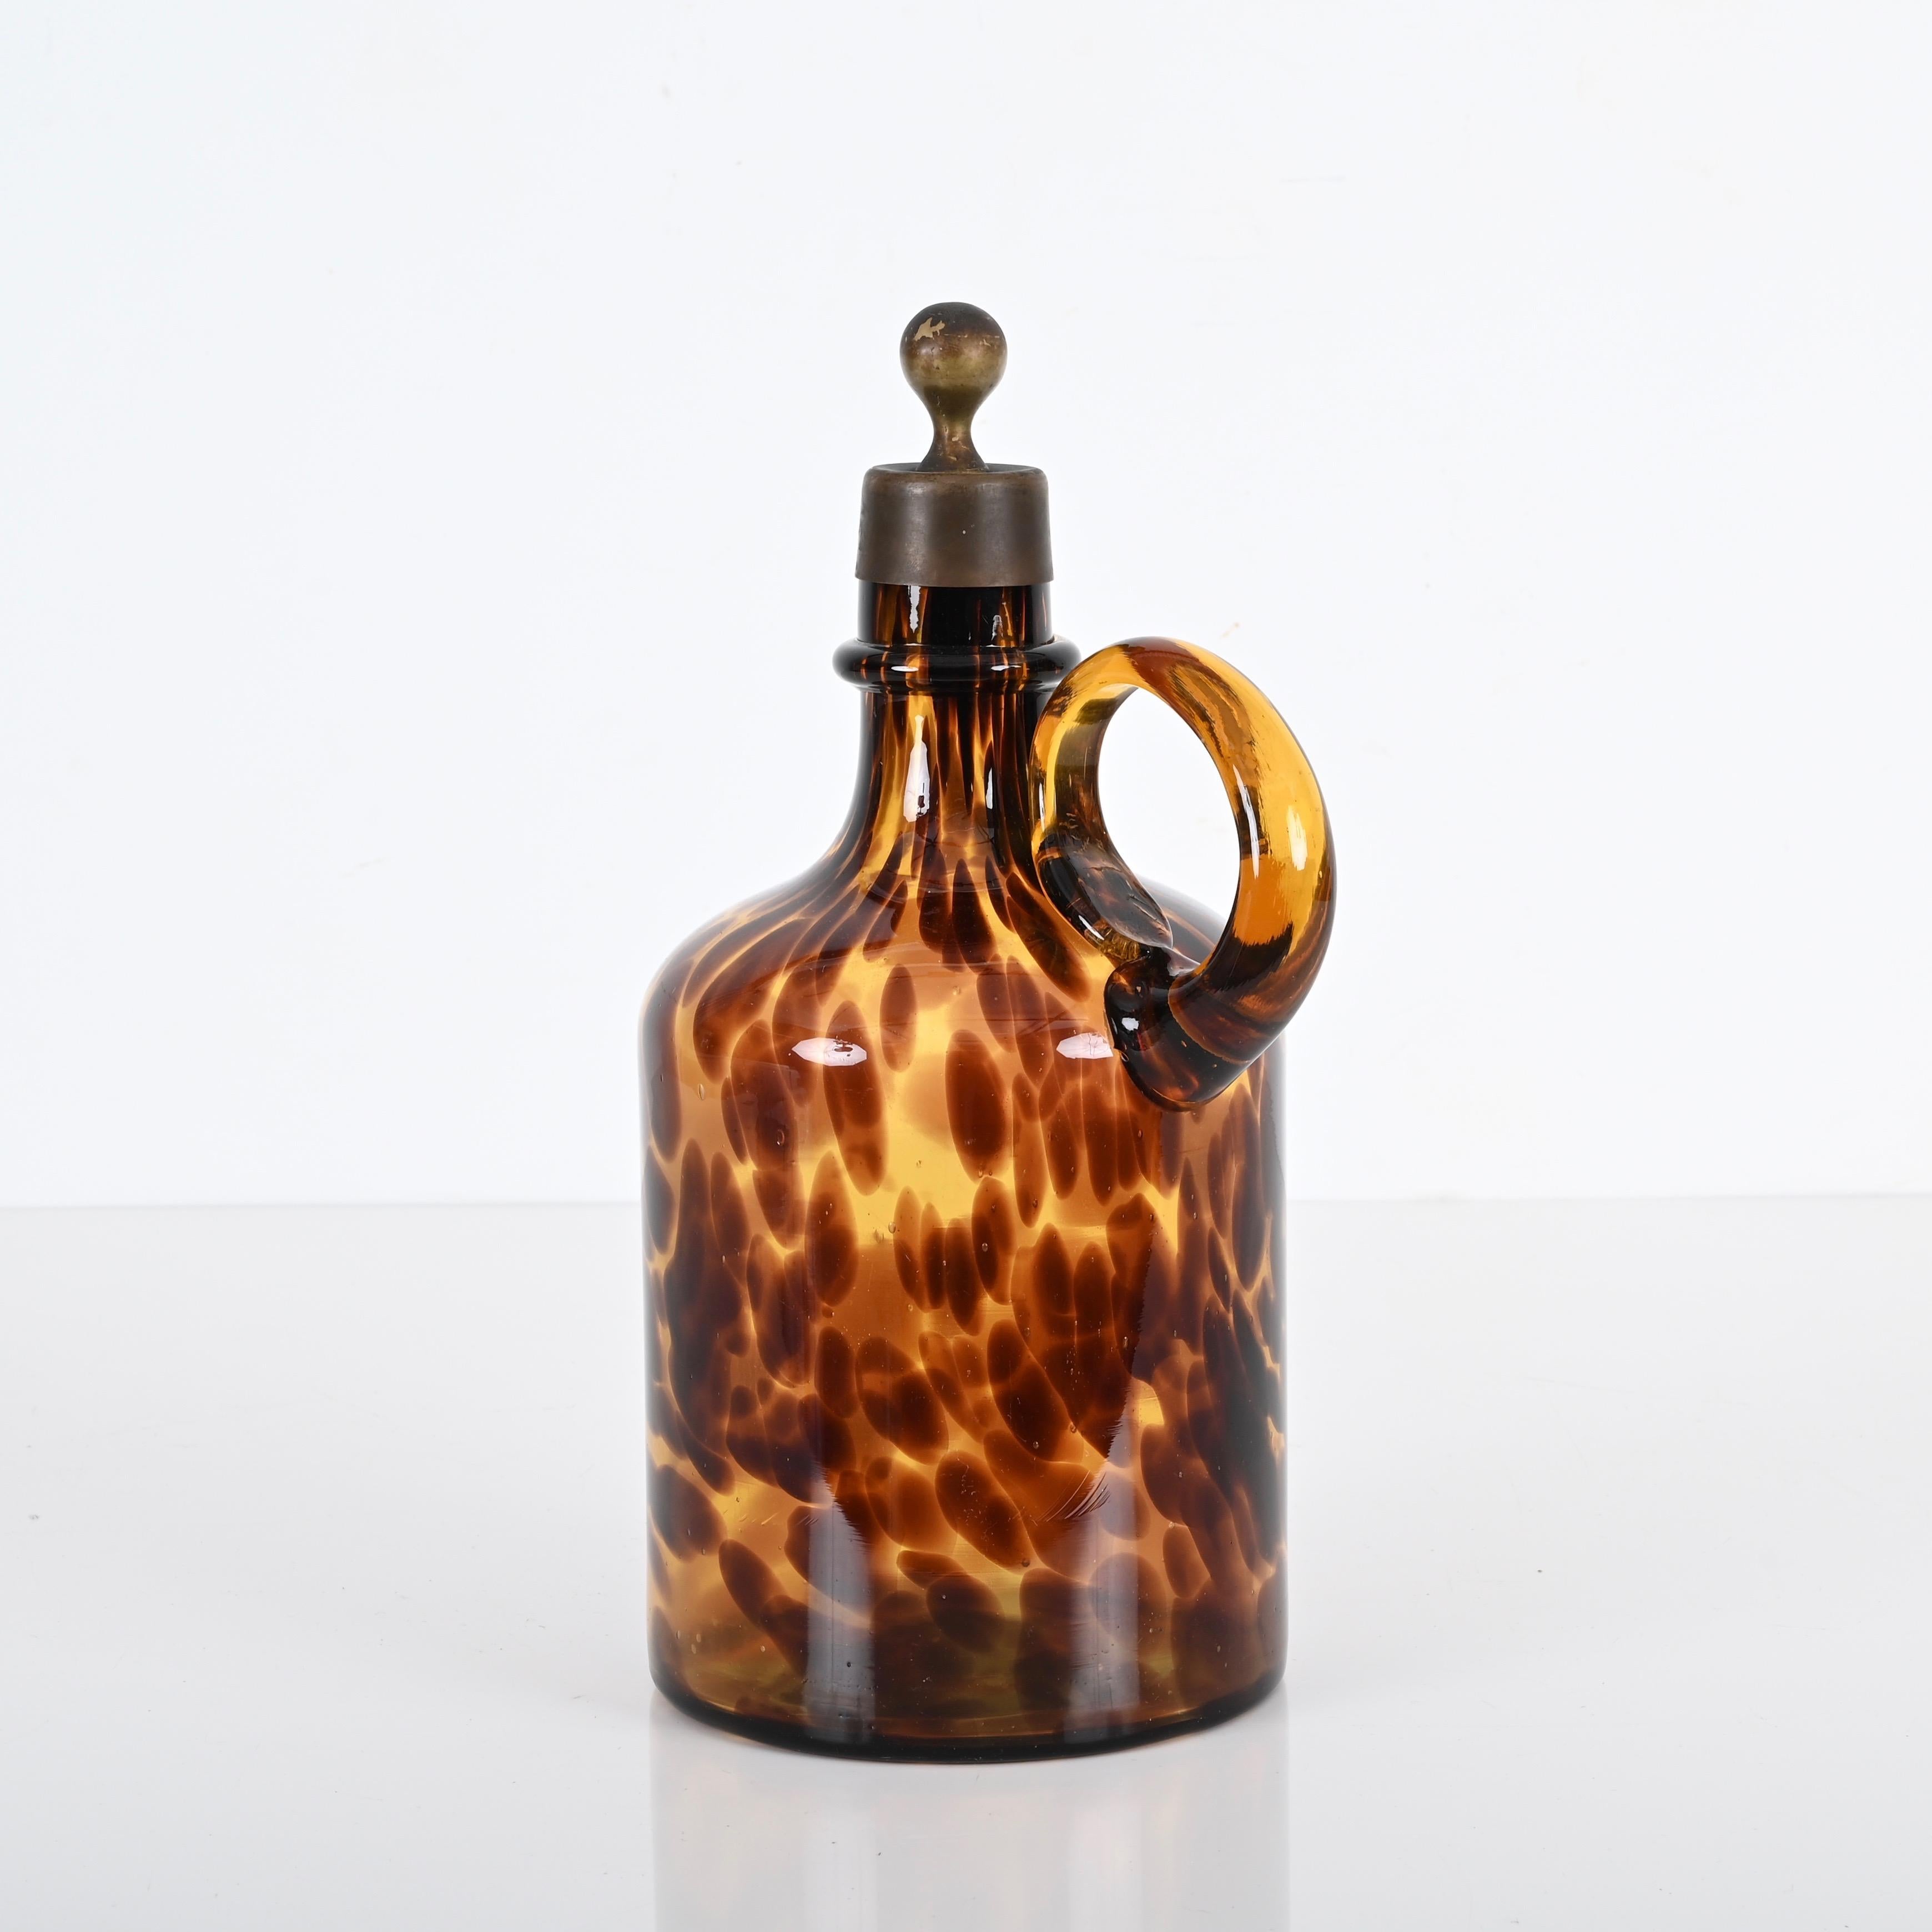 Leopard Murano Art Glass Decorative Pitcher with Brass Cap, Italy 1970s For Sale 2